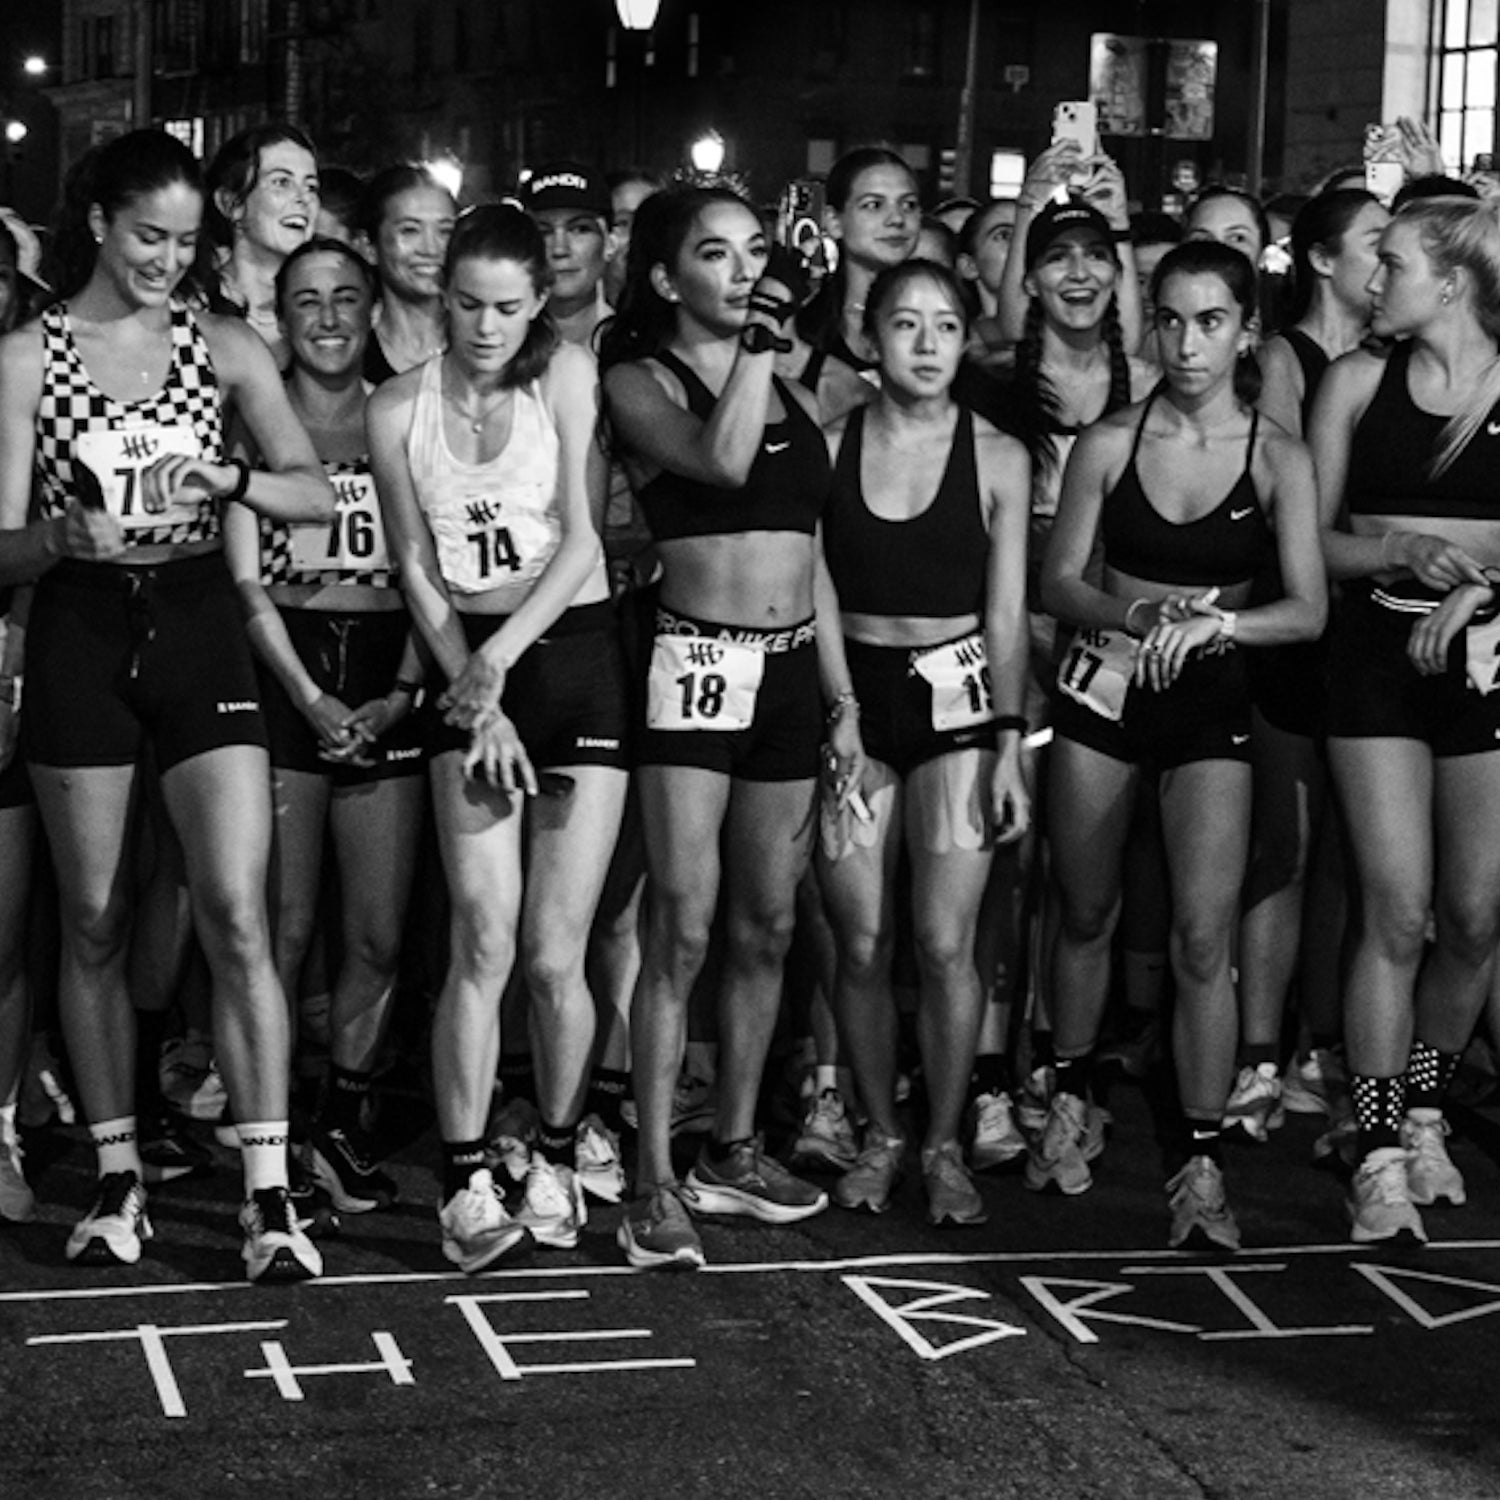 adidas Is Hosting Free Running Events For Women - Secret London